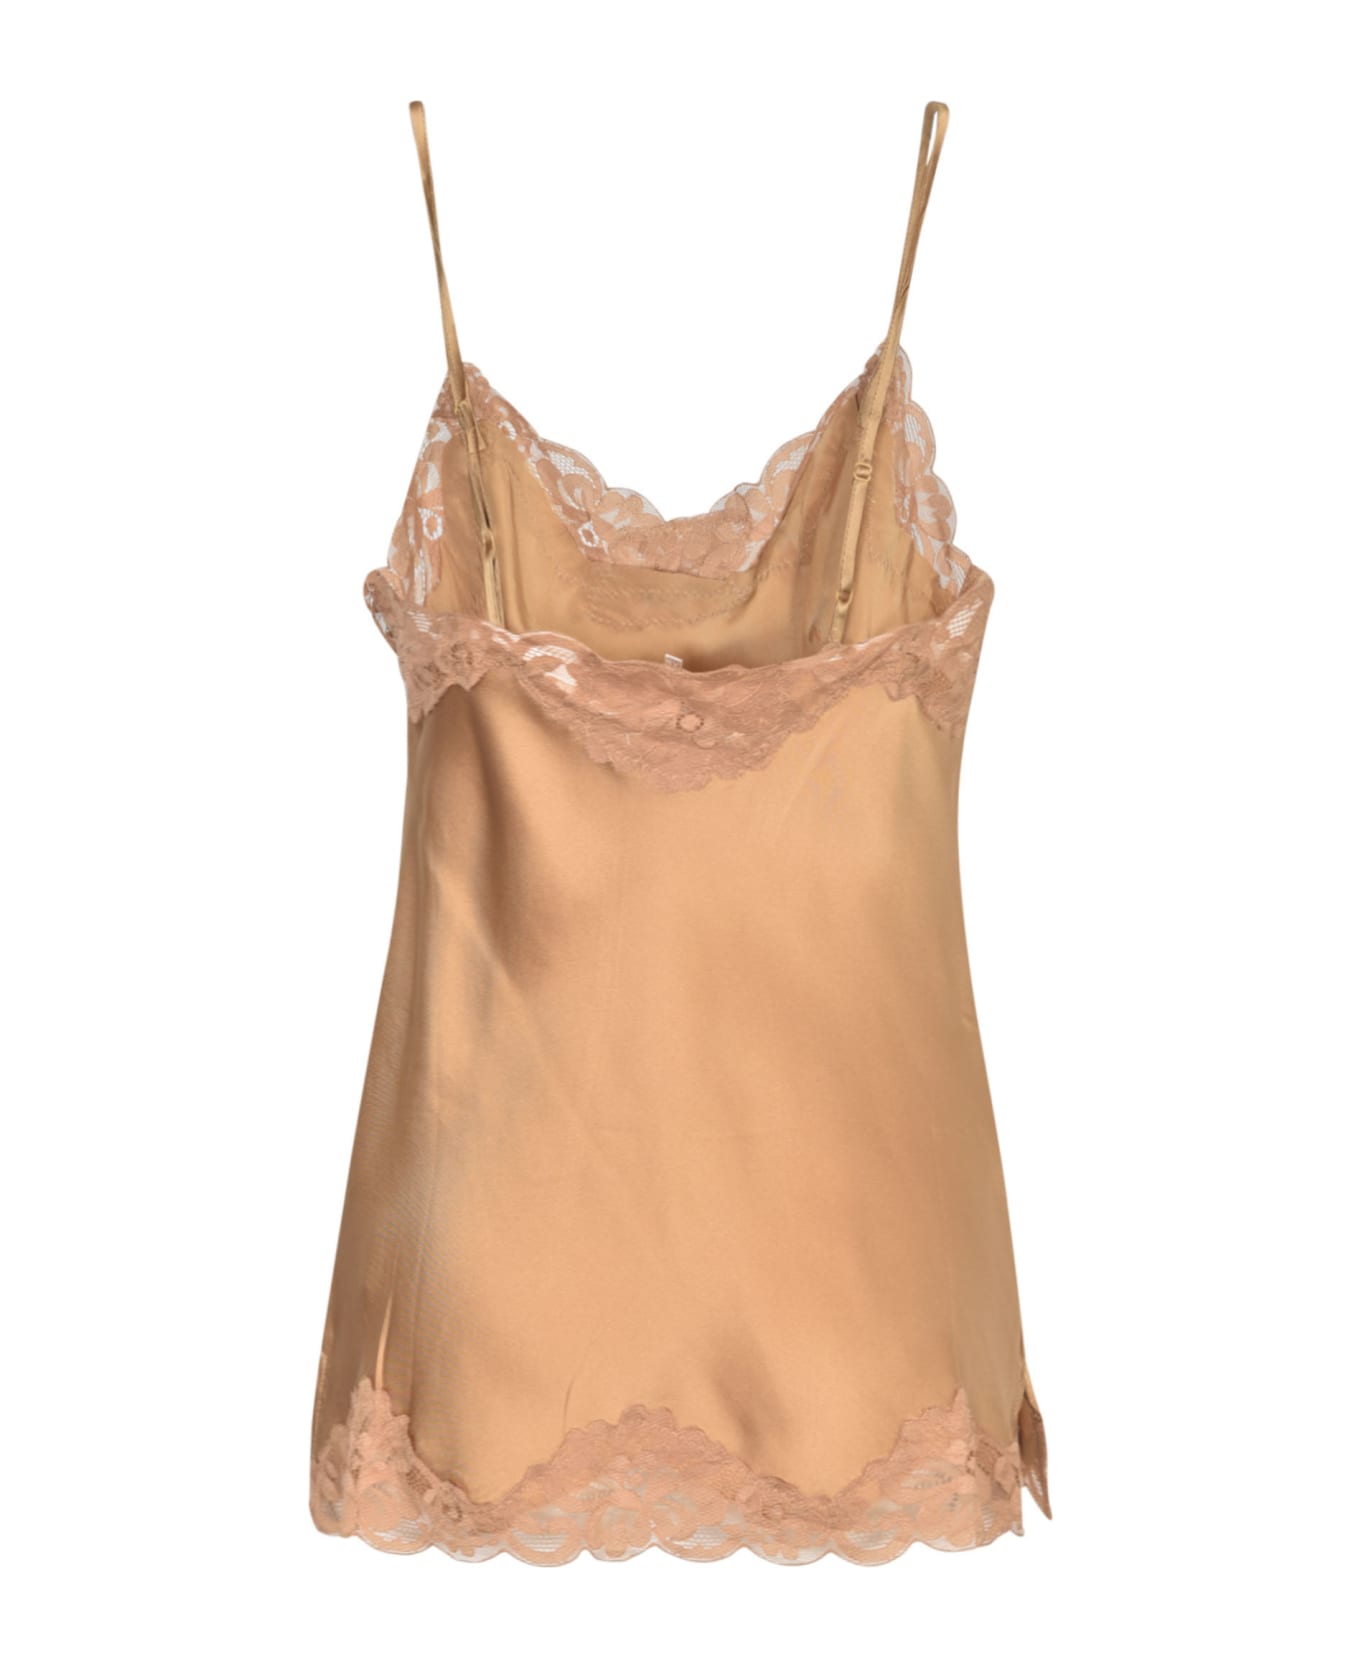 Gold Hawk Laced Top - FALL CAMEL